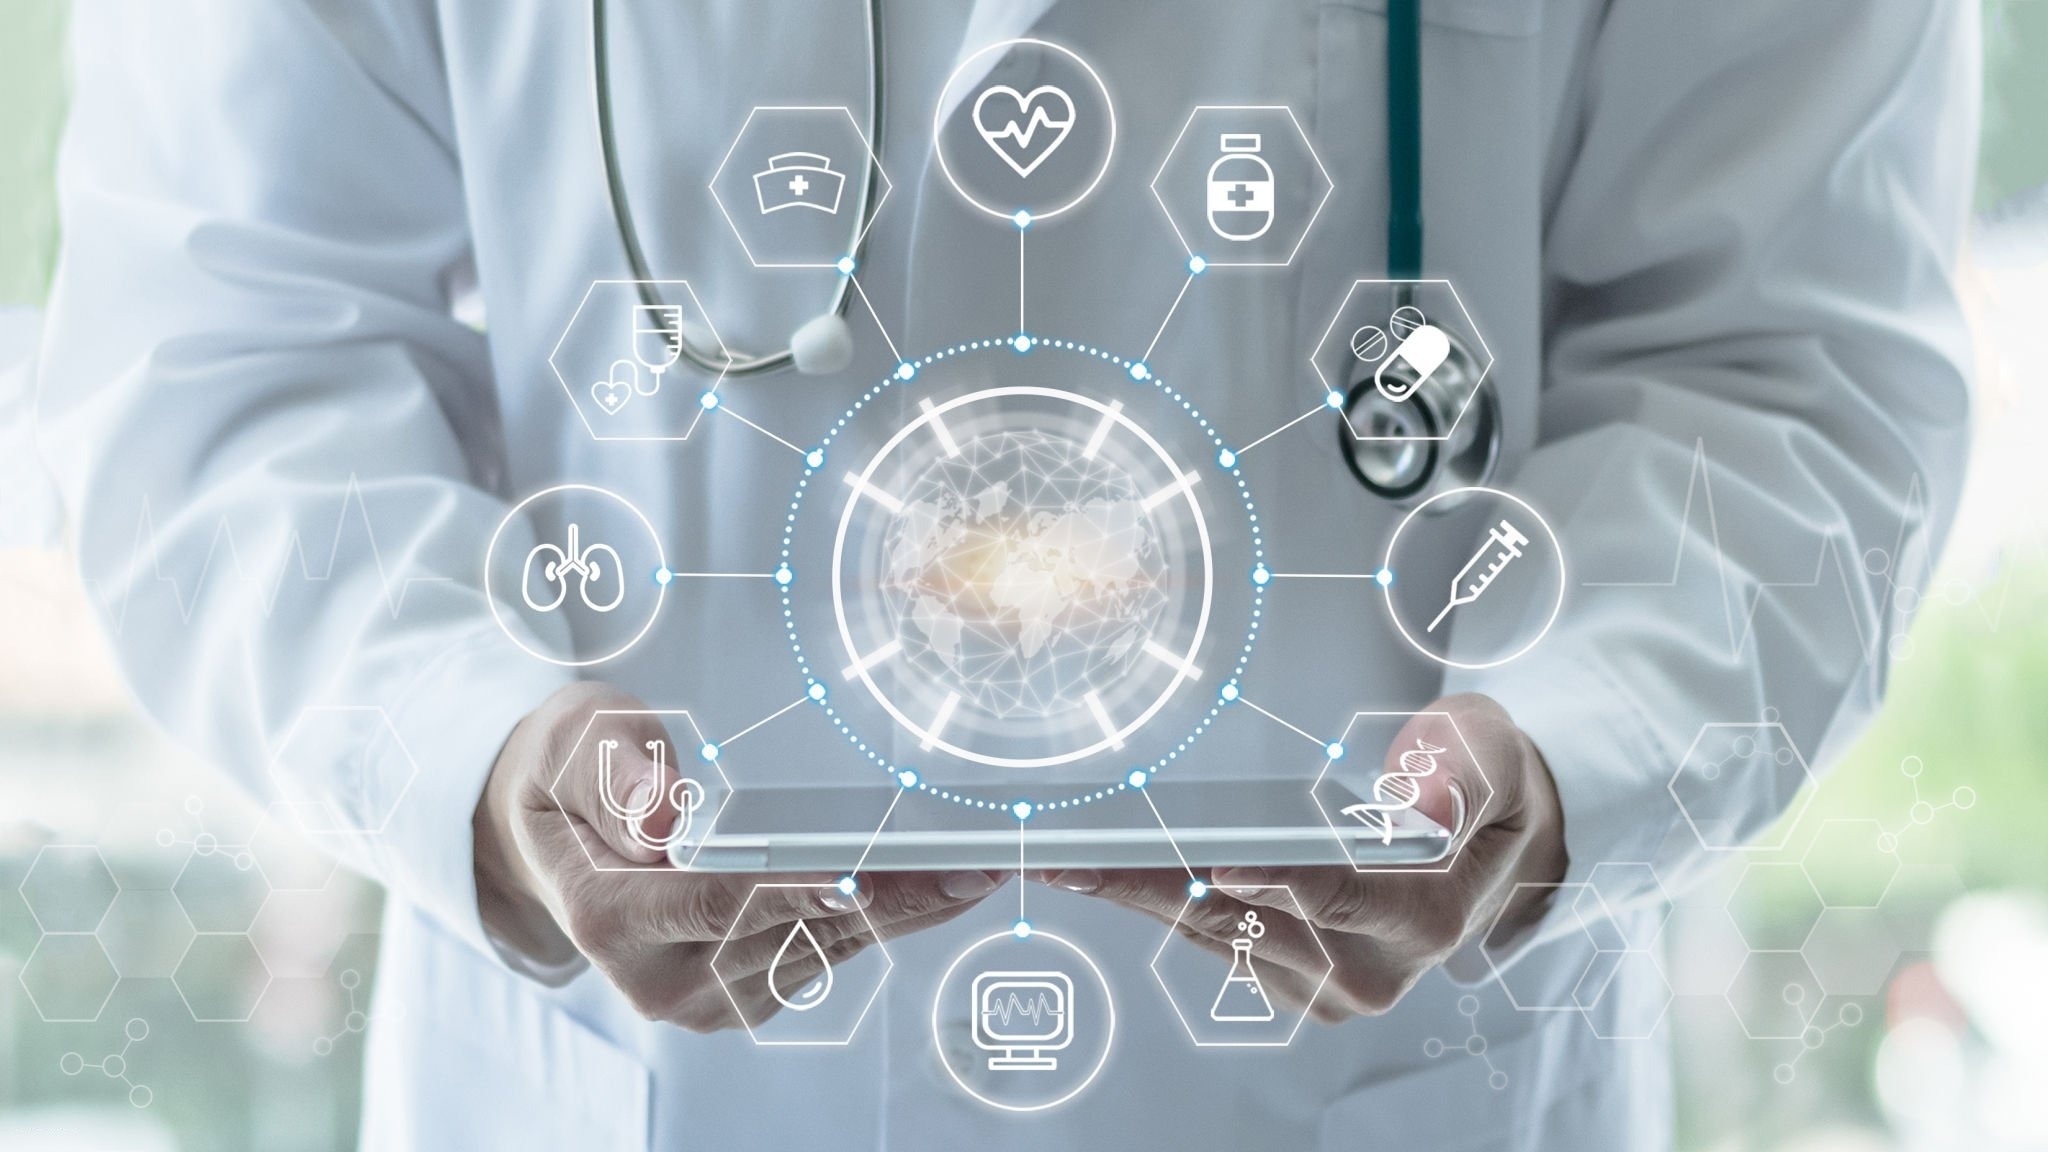 Technology in the healthcare industry